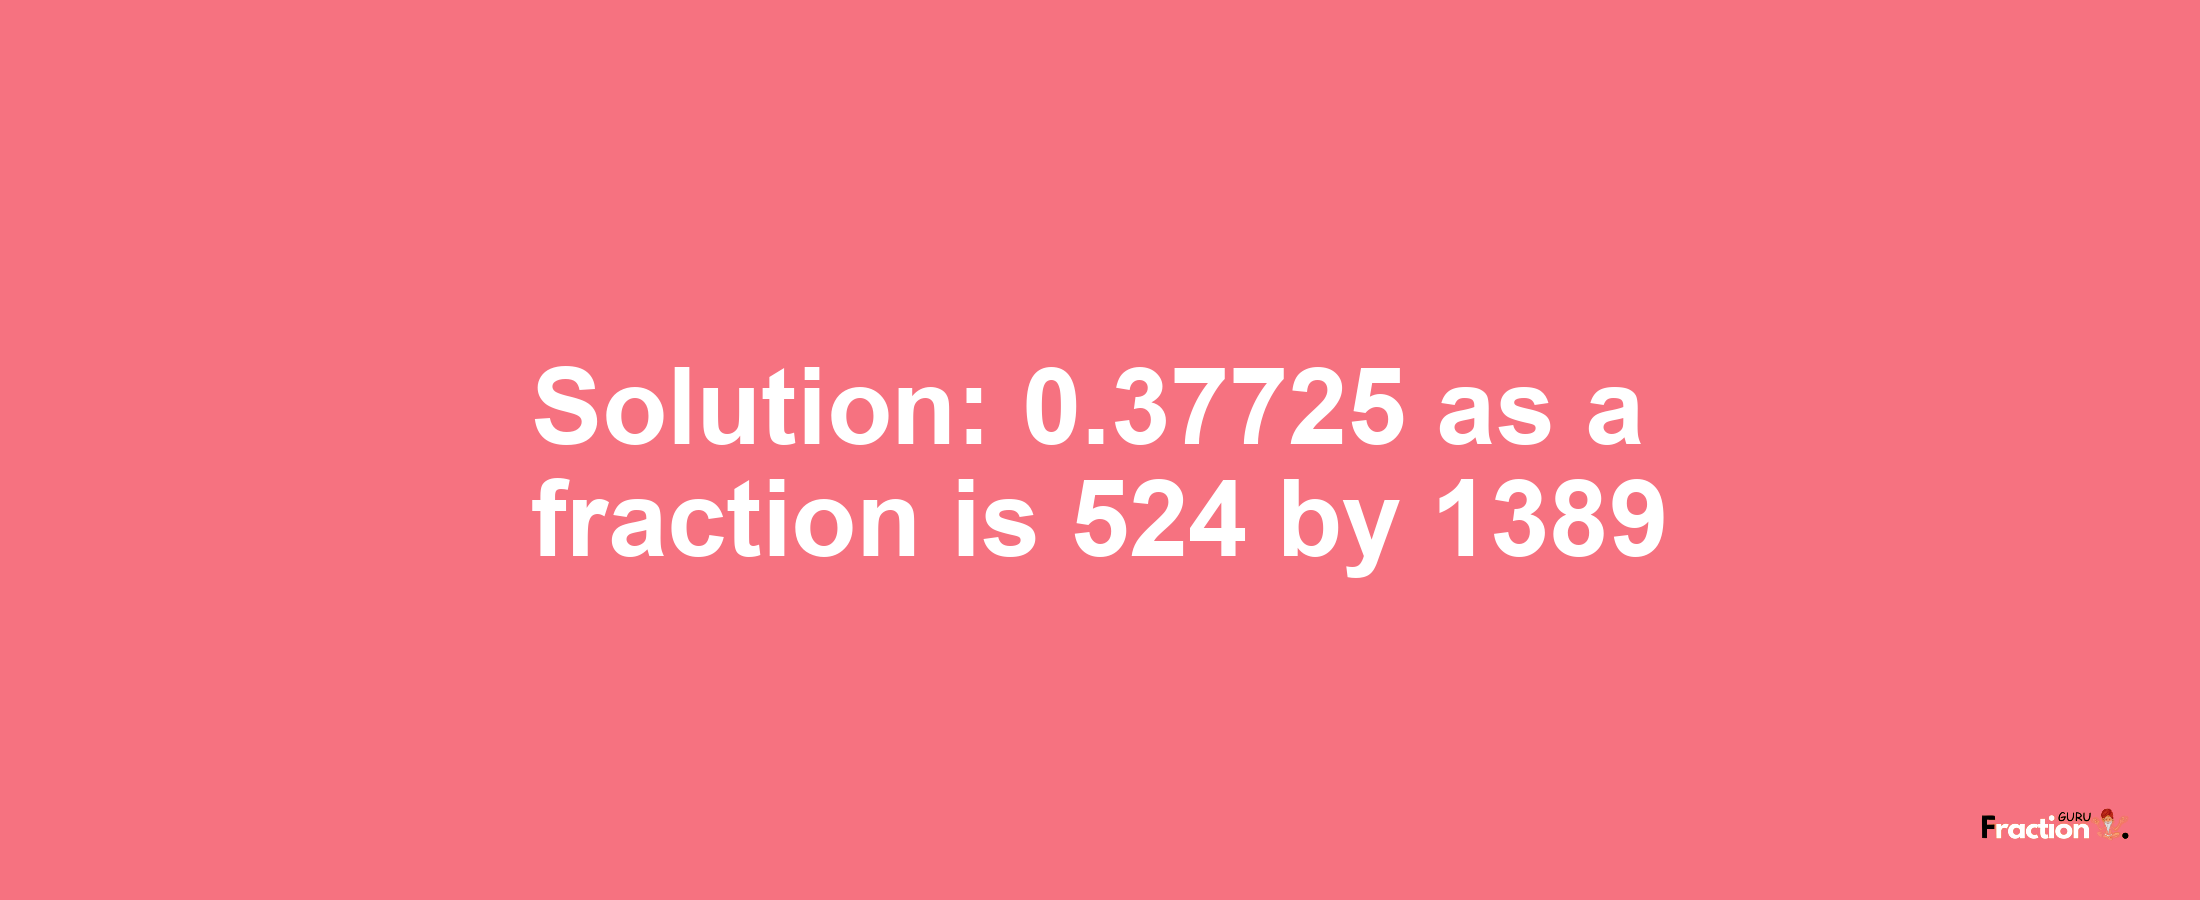 Solution:0.37725 as a fraction is 524/1389